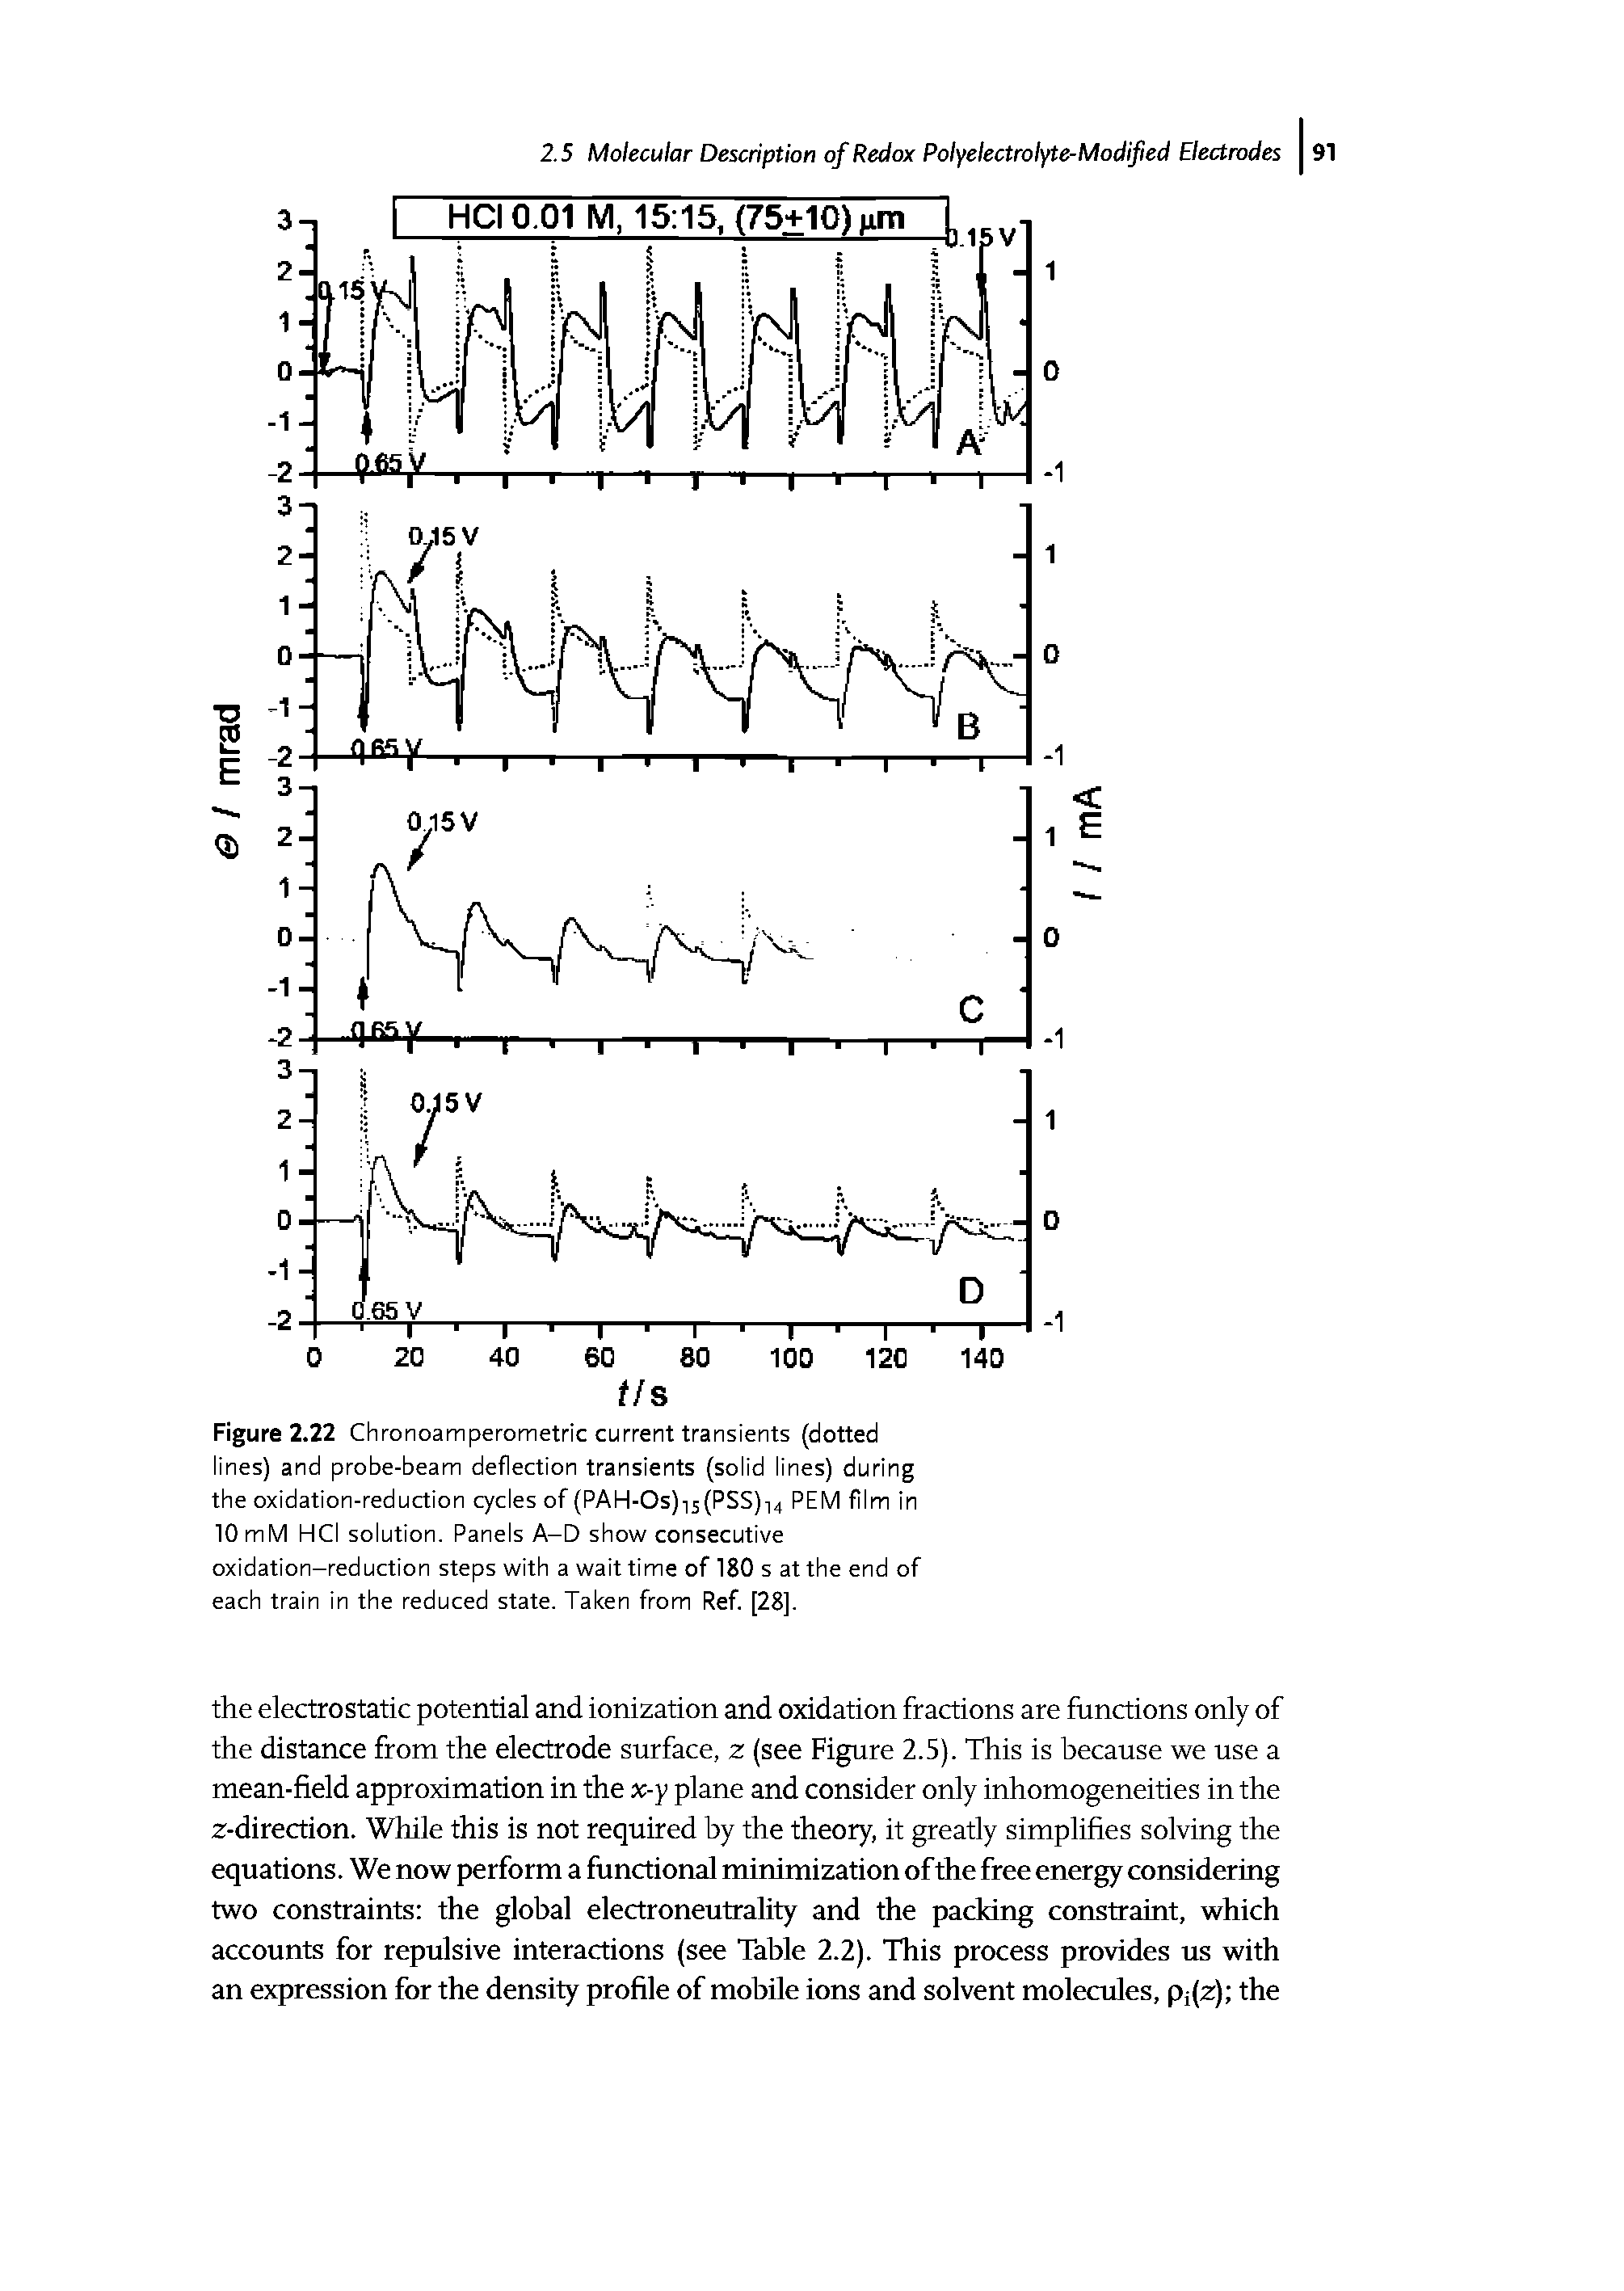 Figure 2.22 Chronoamperometric current transients (dotted lines) and probe-beam deflection transients (solid lines) during the oxidation-reduction cycles of (PAH-Os)t5(PSS)- 4 PEM film in 10 mM HCI solution. Panels A-D show consecutive oxidation-reduction steps with a wait time of 180 s at the end of each train in the reduced state. Taken from Ref. [28].